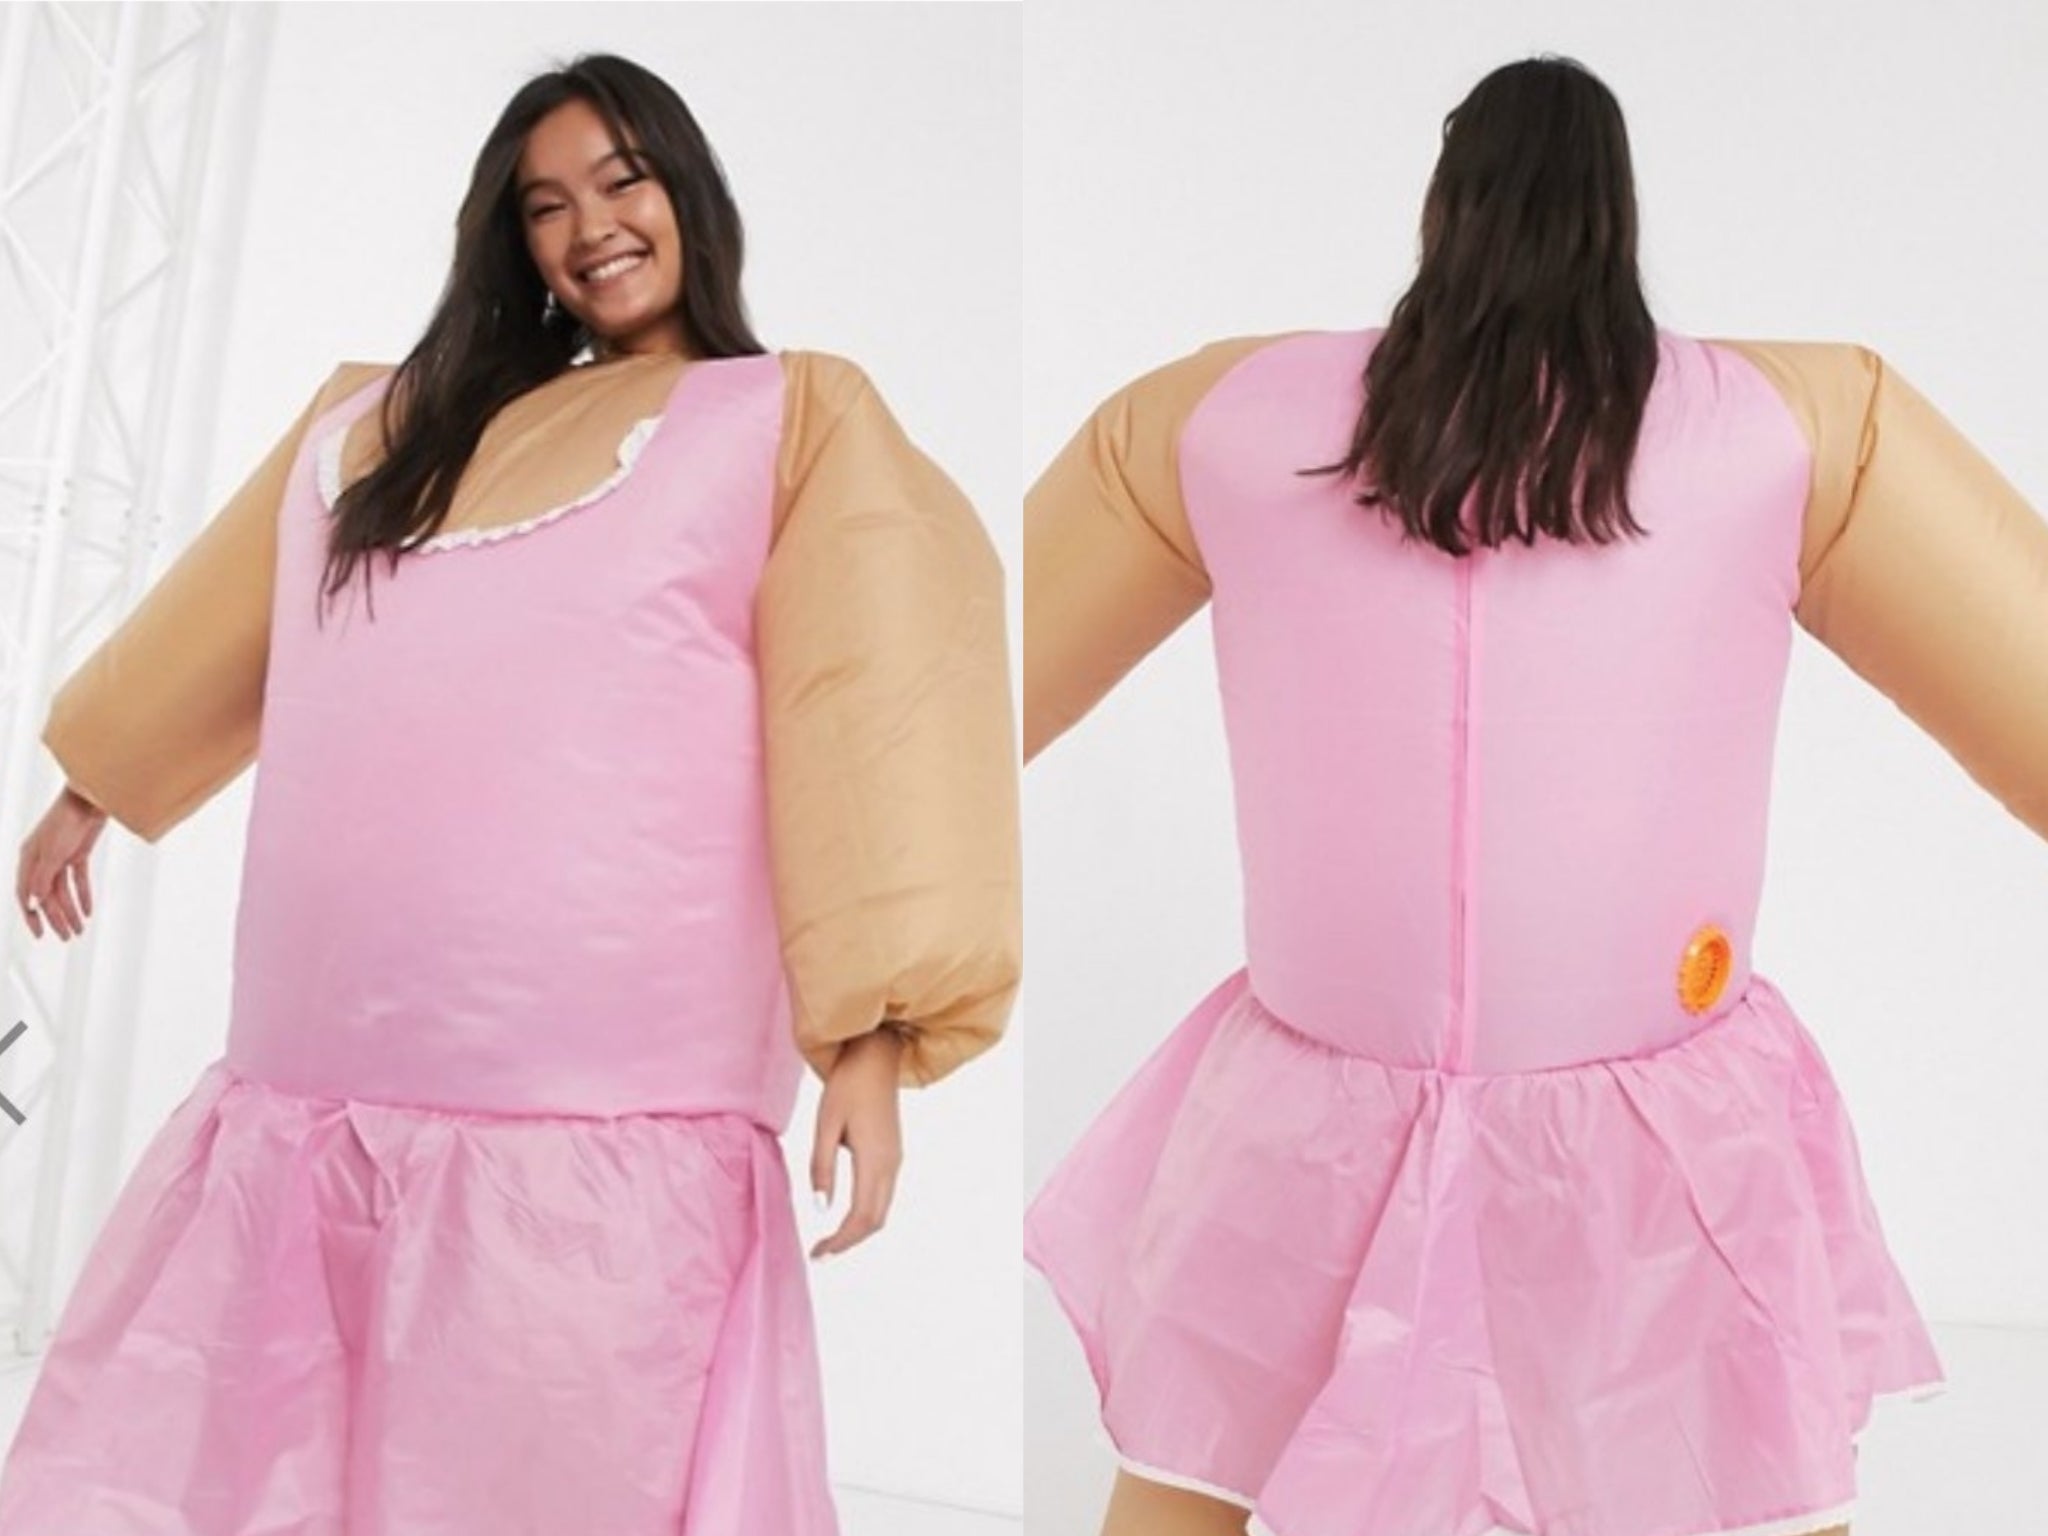 Asos apologises after being accused of 'laughing' at plus-size